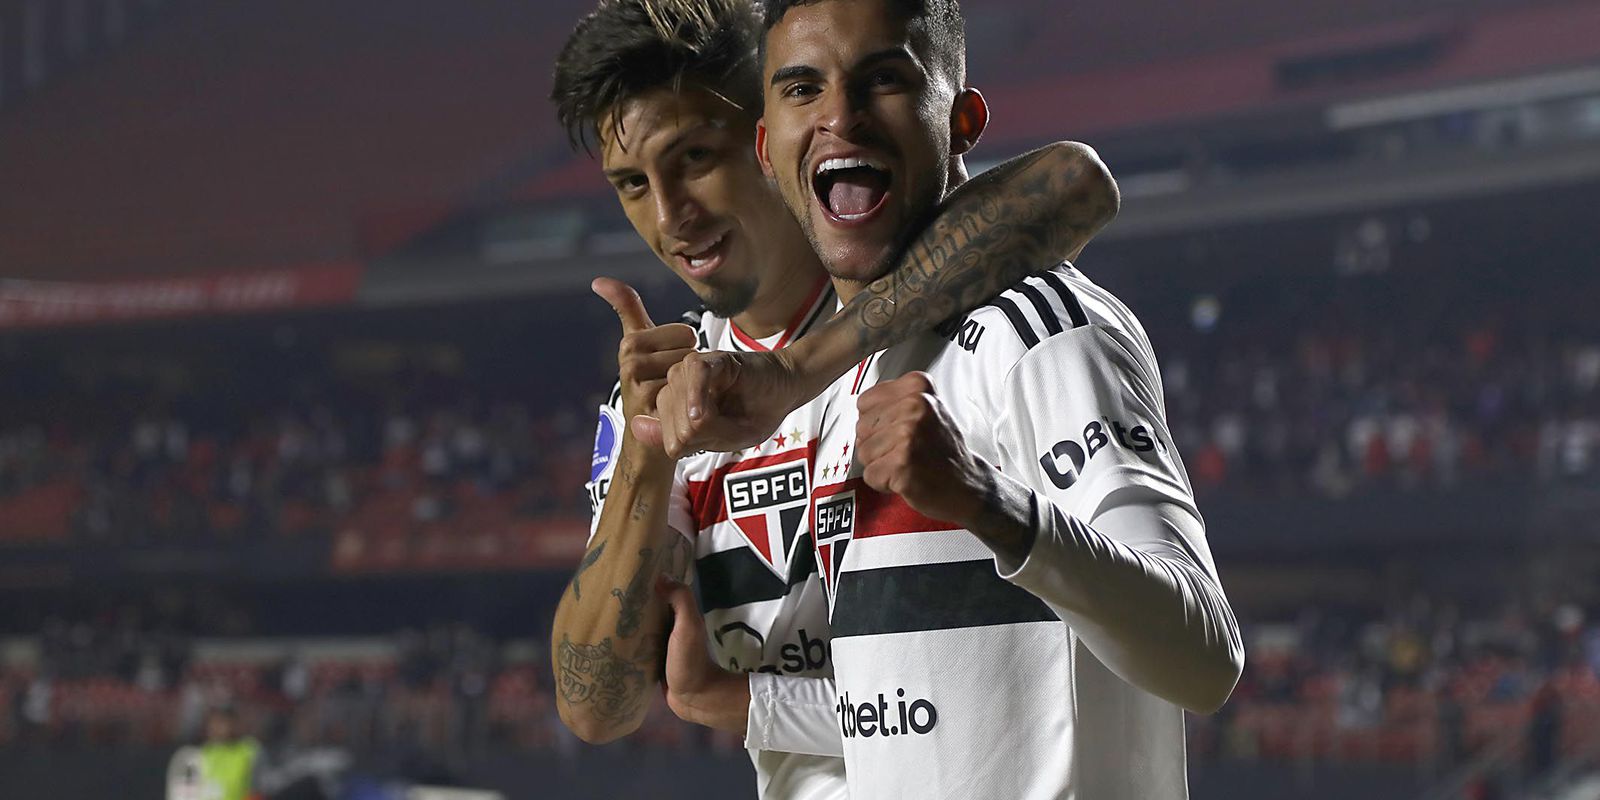 São Paulo triumphs and guarantees itself in the round of 16 of the Sudamericana